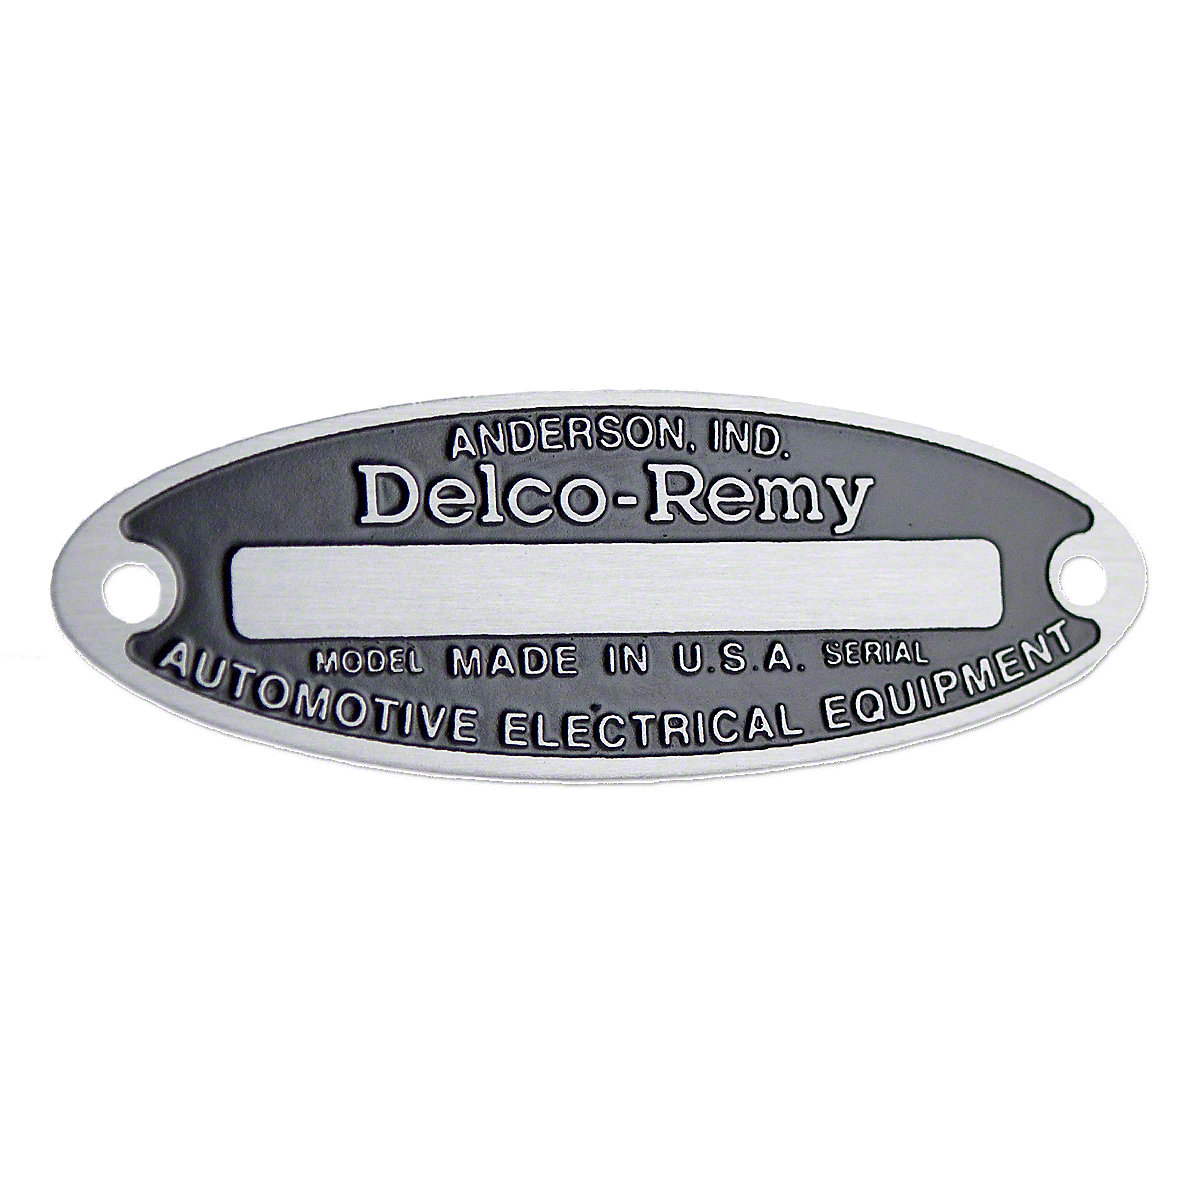 Blank Delco Remy Distributor Tag For Massey Harris And Massey Ferguson Tractors.